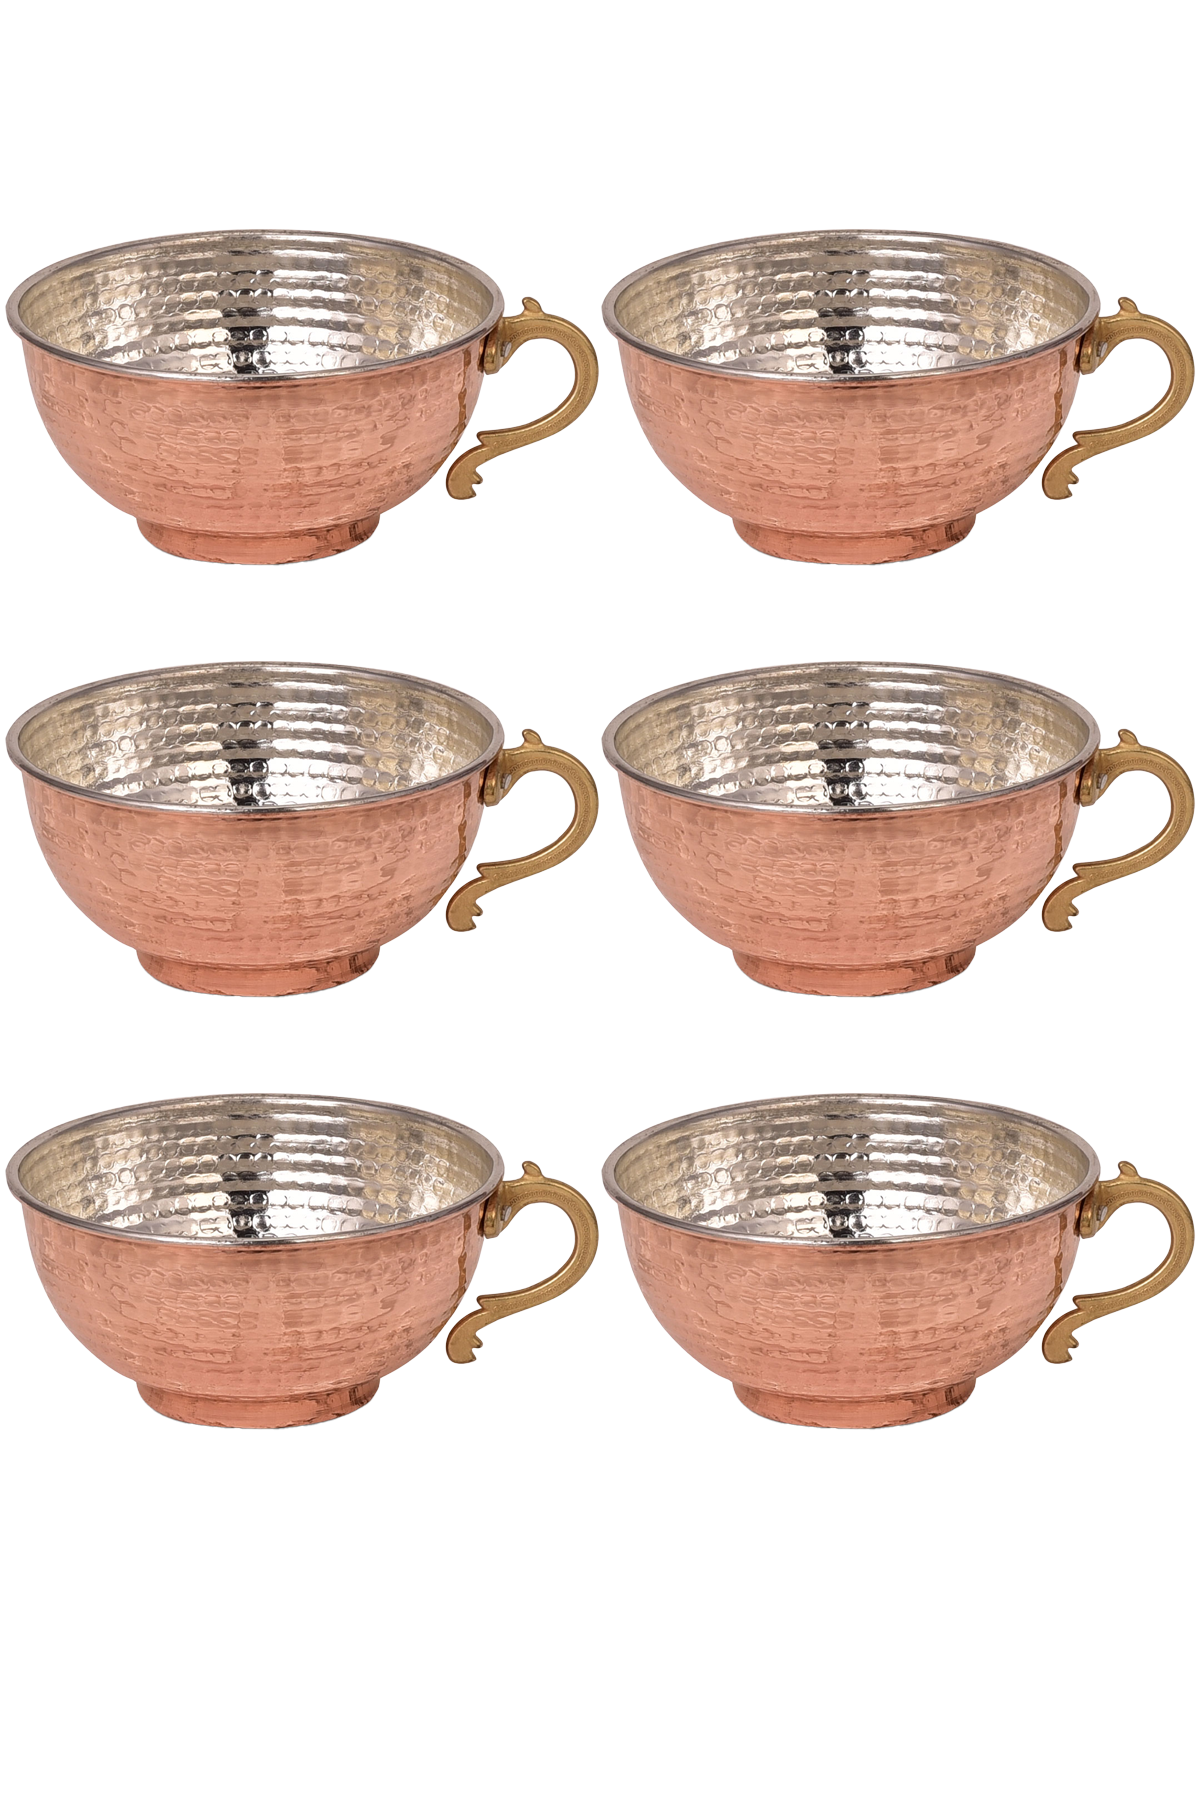 copper Cups 500 Ml Set of 6 Red